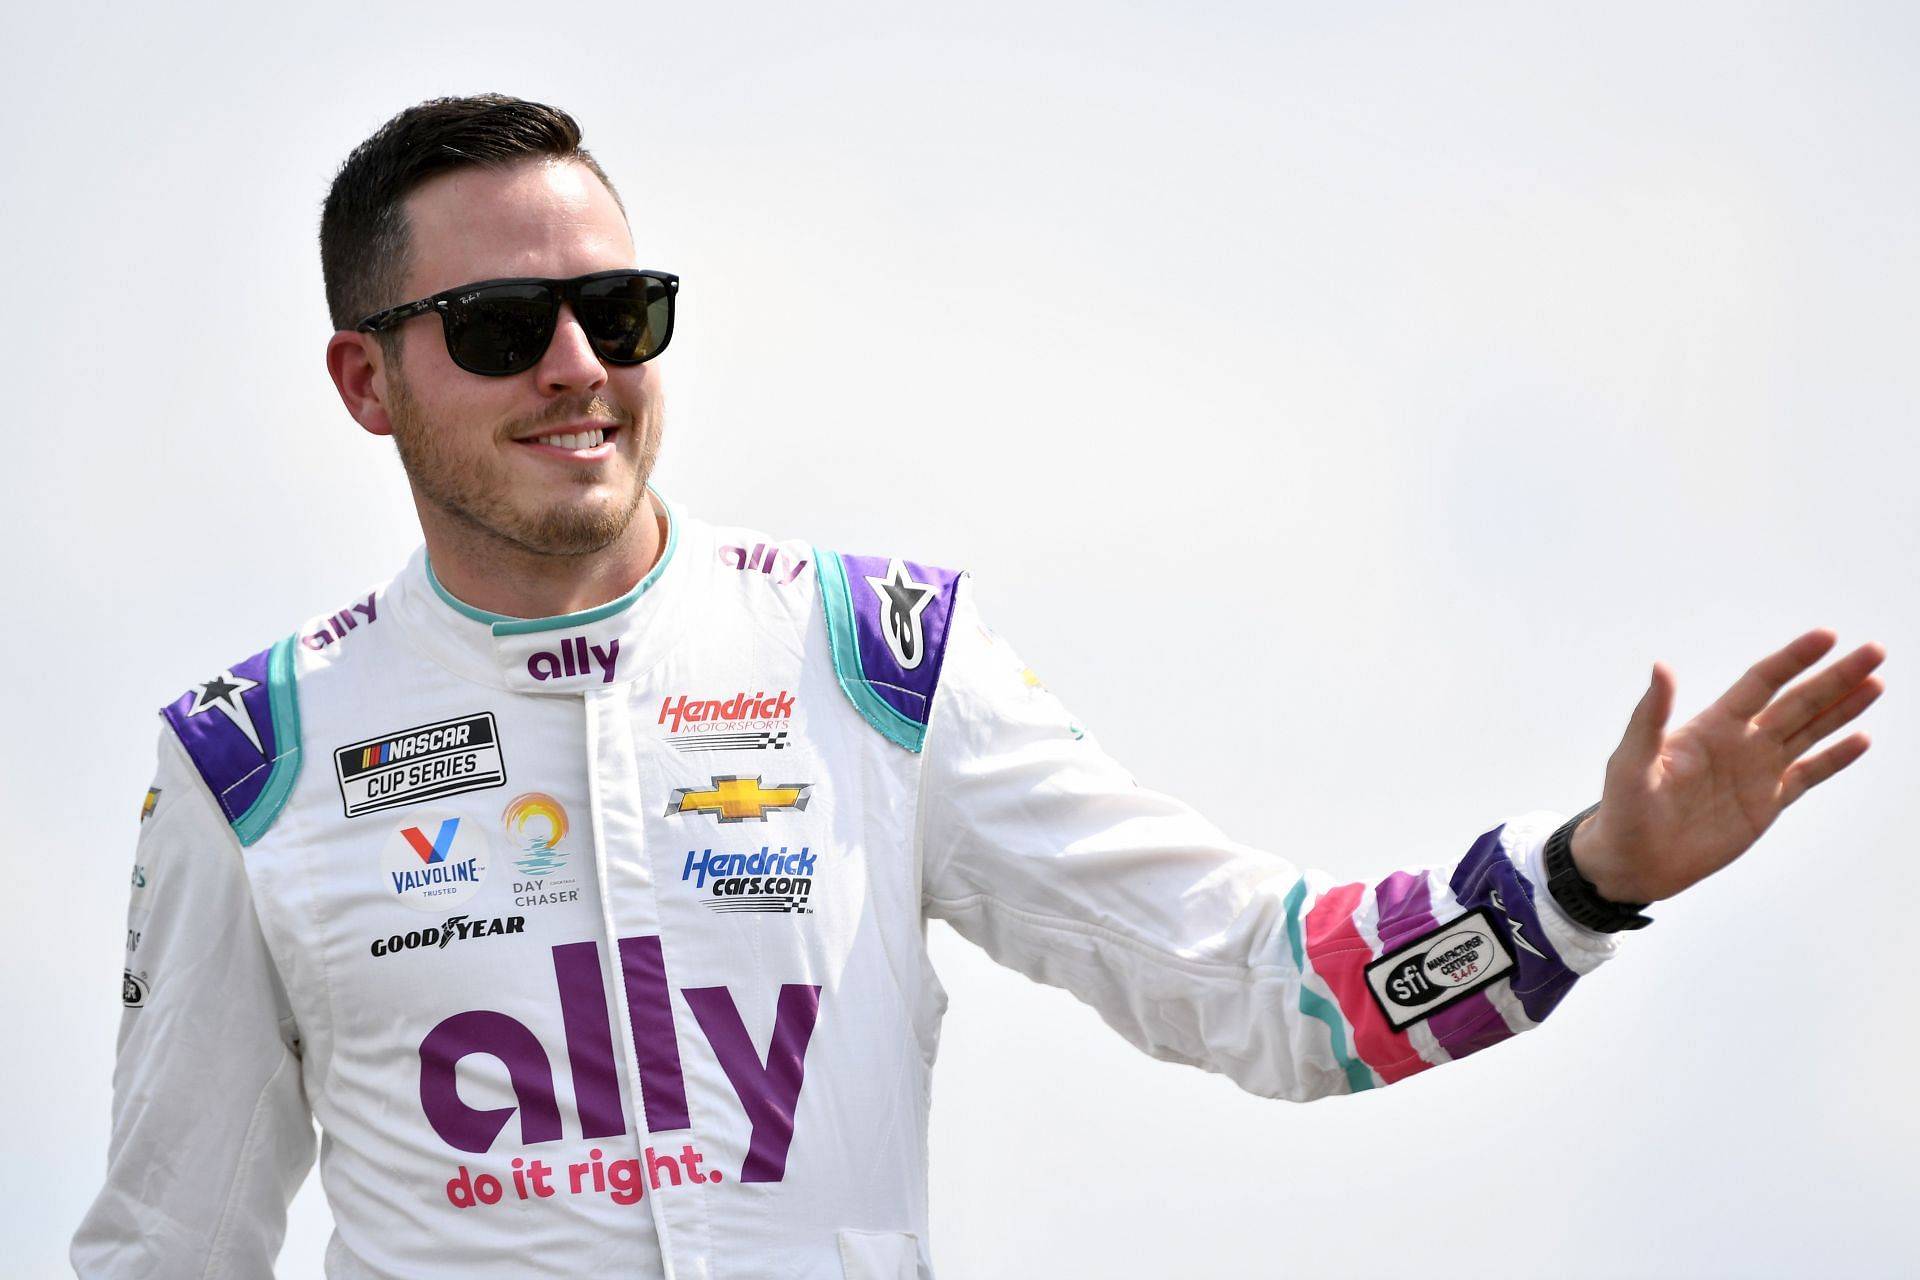 Alex Bowman waves to fans onstage during driver intros before the 2022 NASCAR Cup Series Ally 400 at Nashville Superspeedway in Lebanon, Tennessee (Photo by Logan Riely/Getty Images)